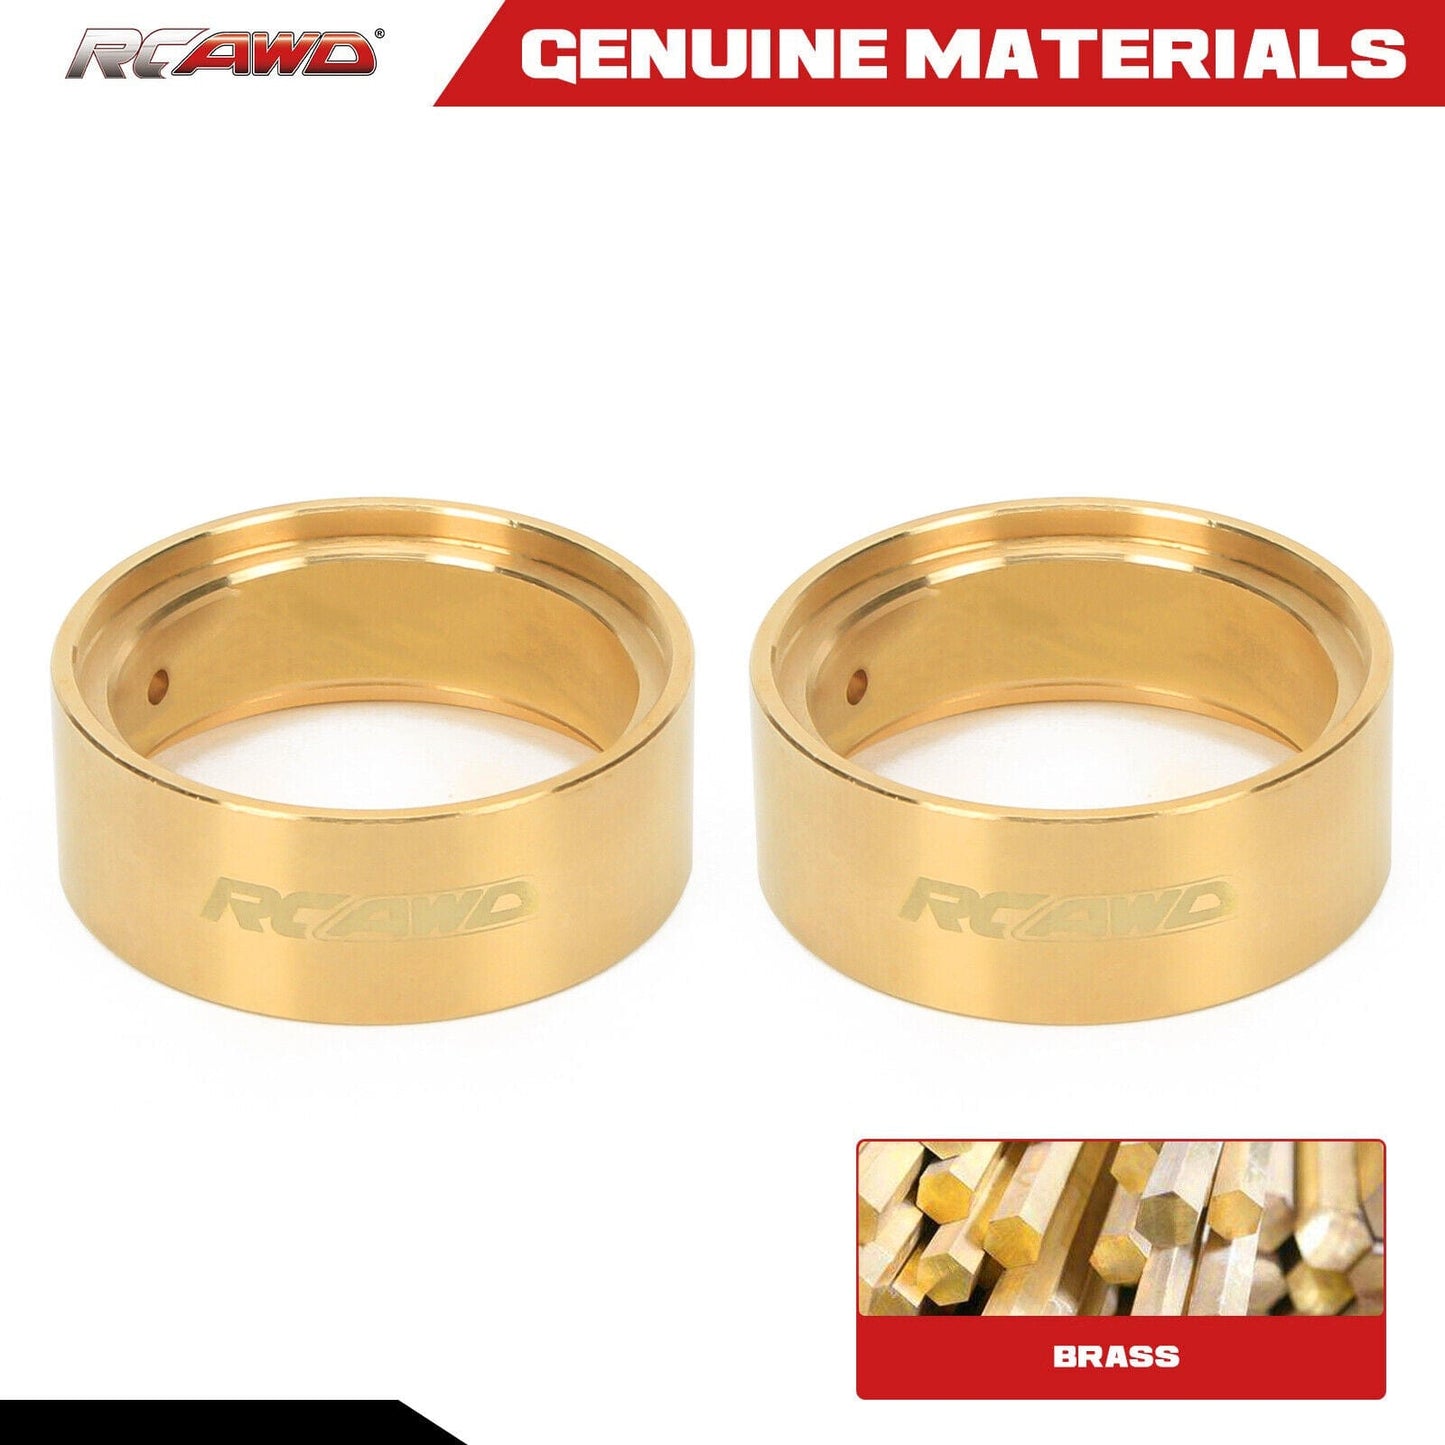 RCAWD FMS FCX24 RCAWD FCX24 Upgrade 2PCS 106g Brass Inner Clamp Rings C3007